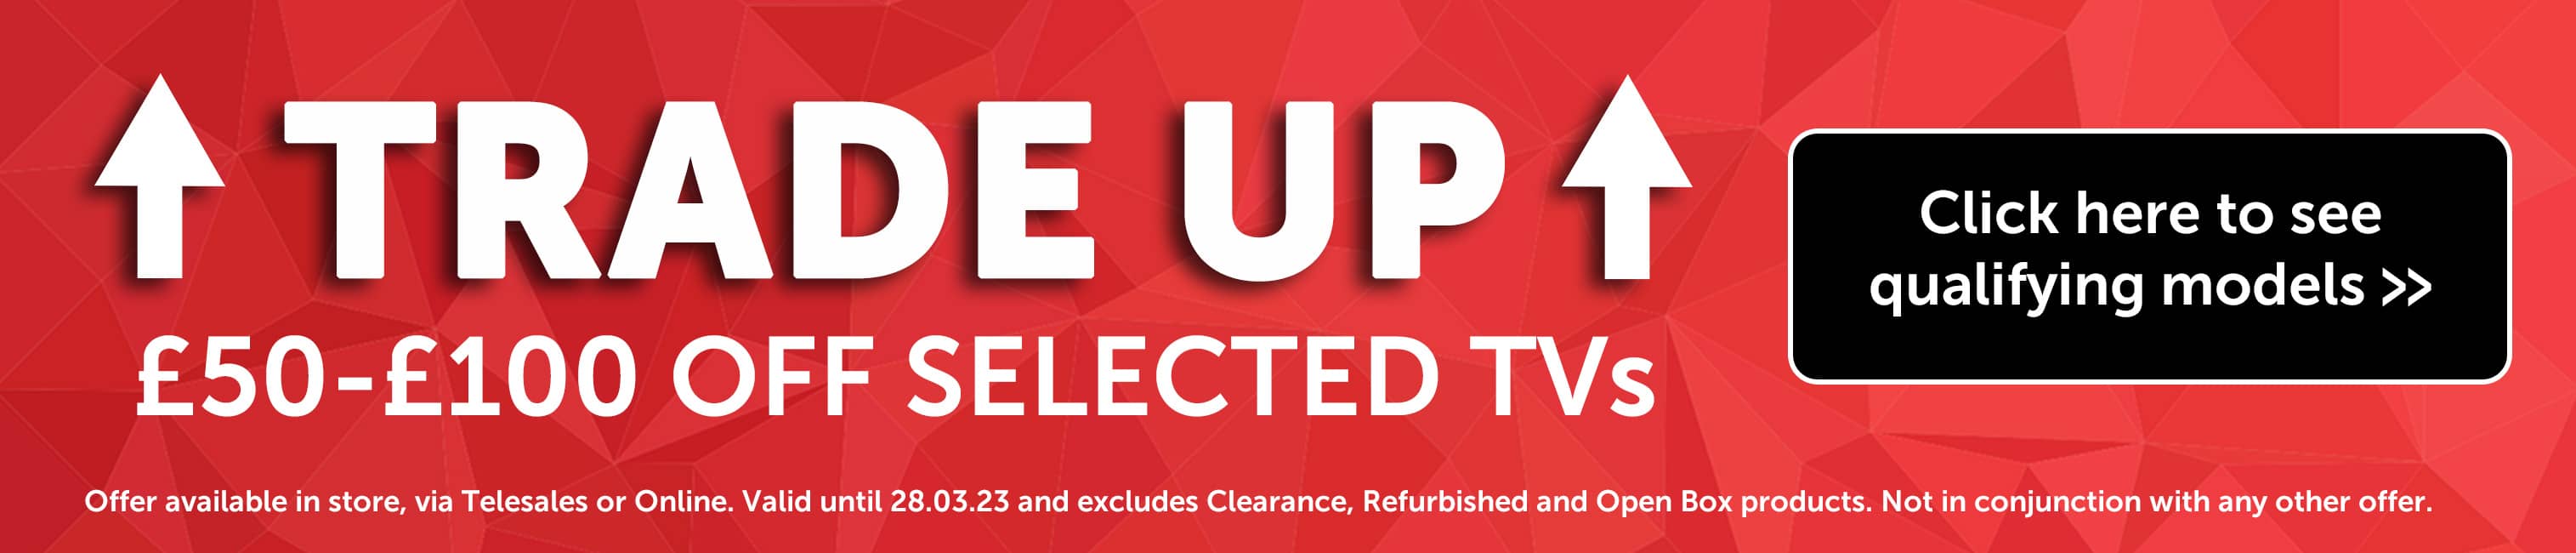 Trade up and save on TVs